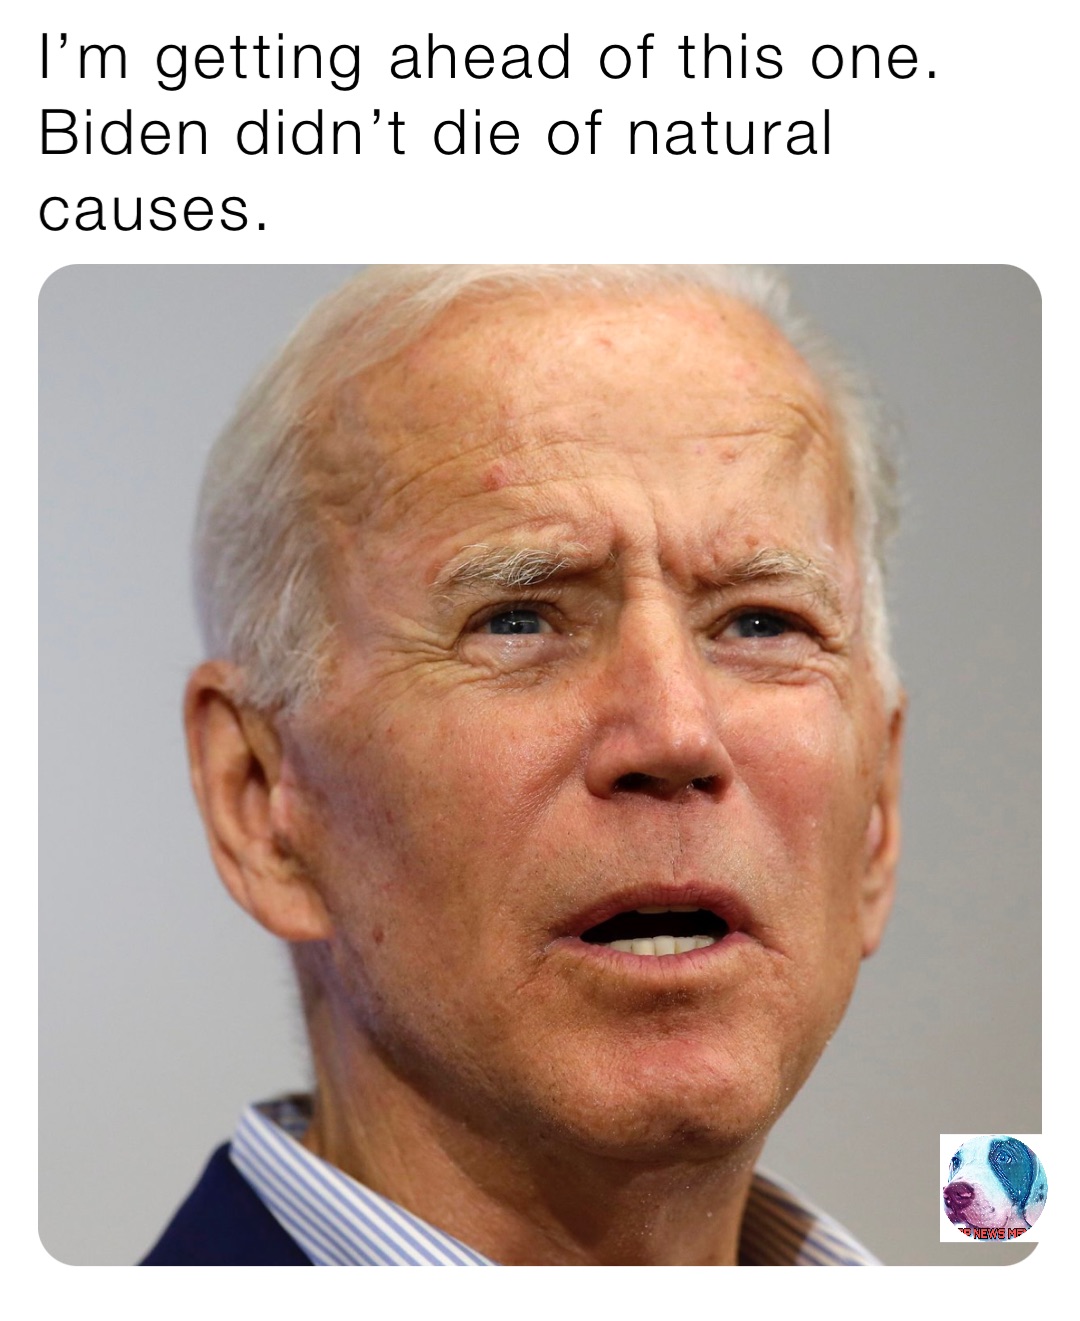 I’m getting ahead of this one. Biden didn’t die of natural causes.